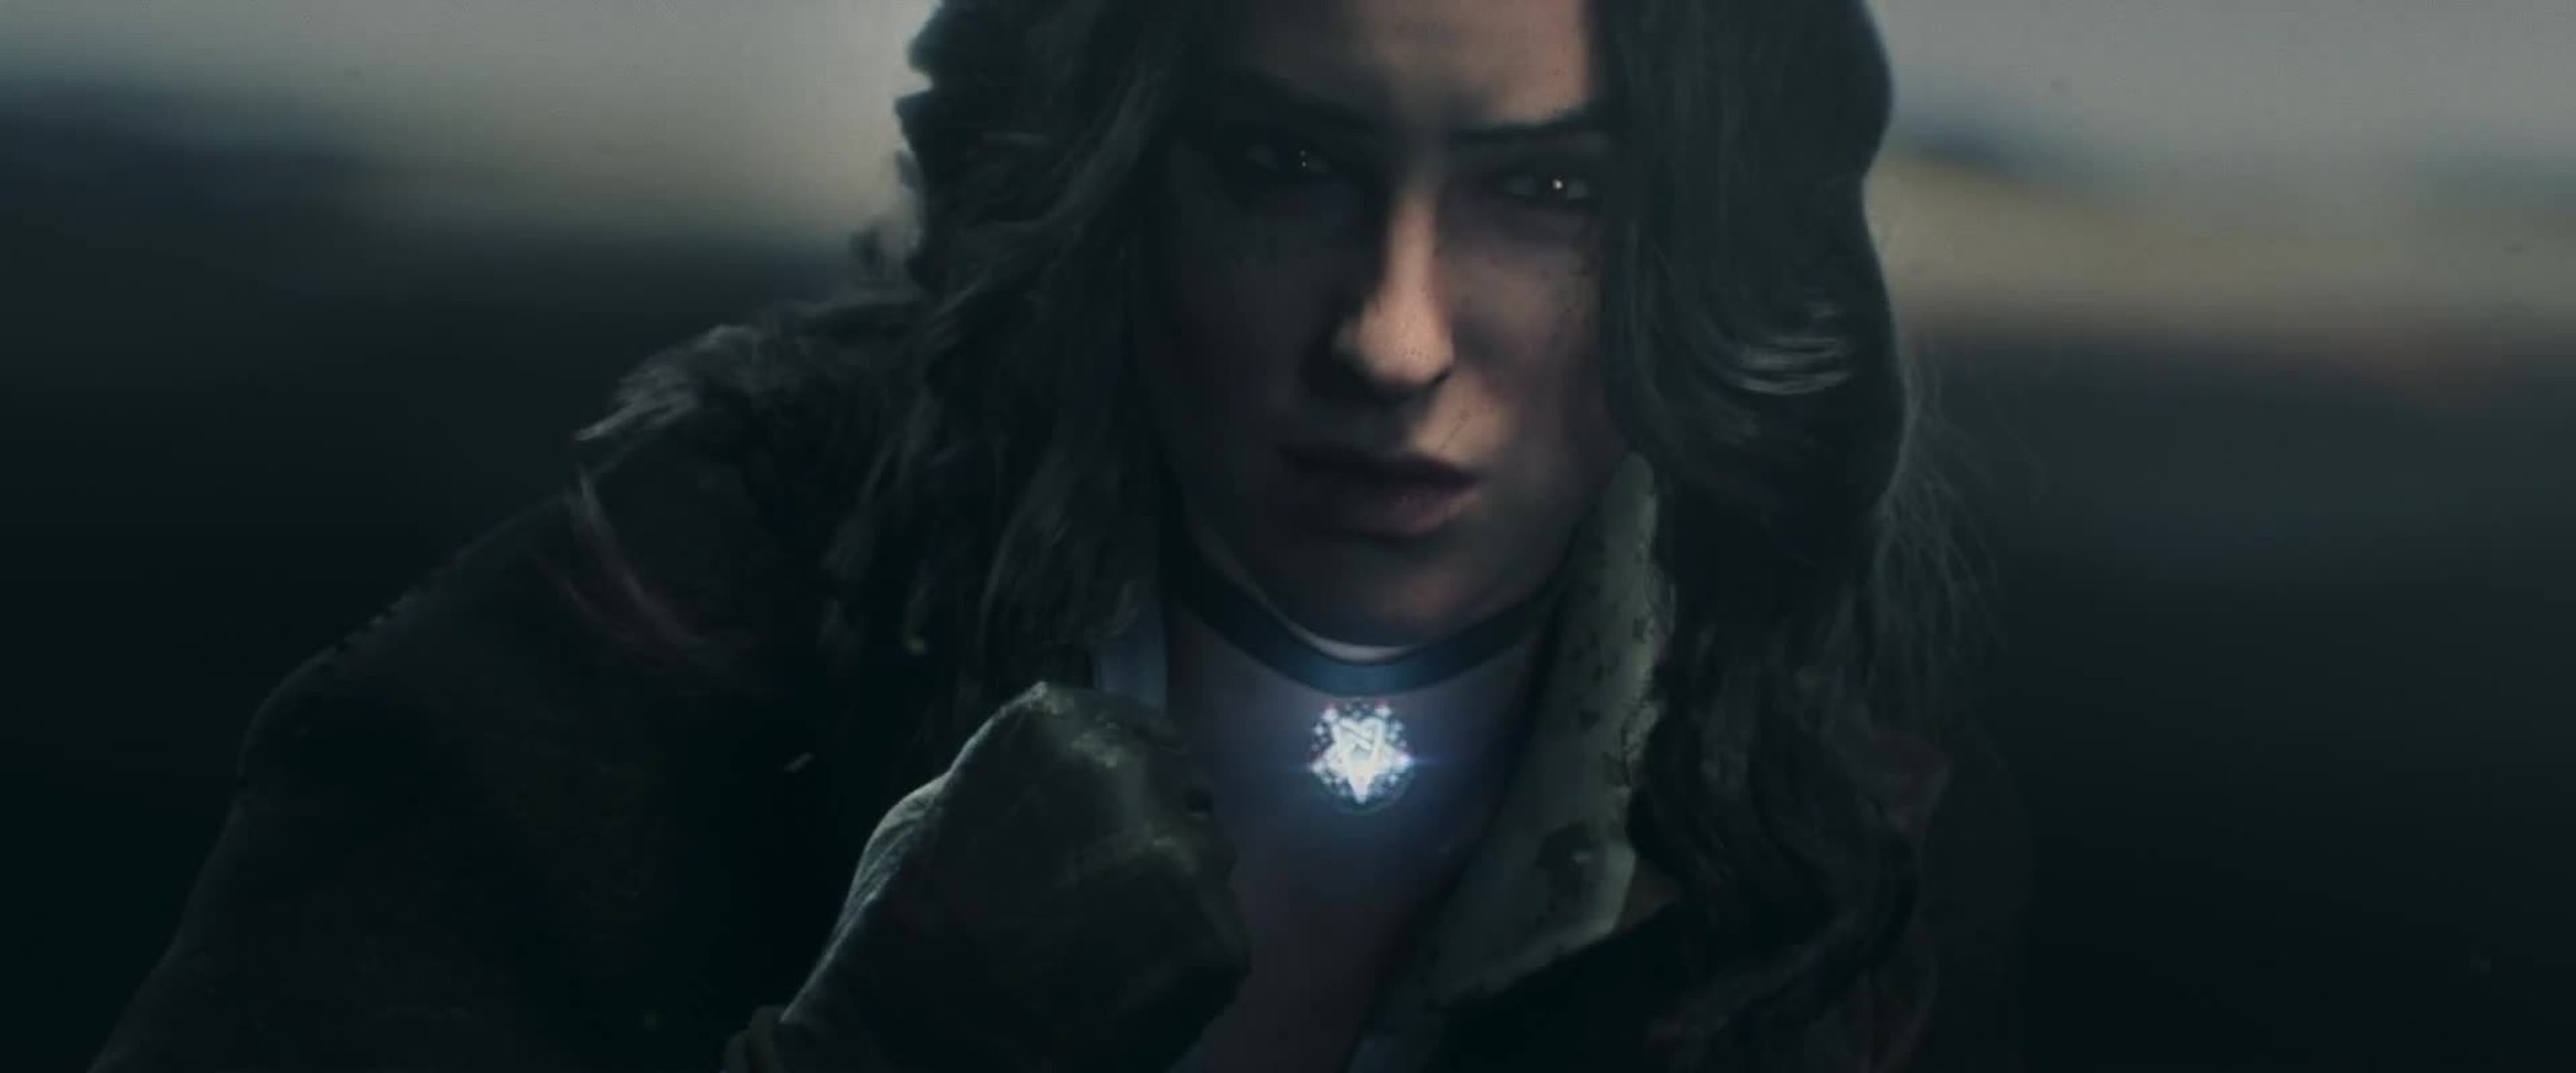 The Witcher 3: The Wild Hunt - Opening Cinematic Trailer (The Trail) [EN] -  video Dailymotion